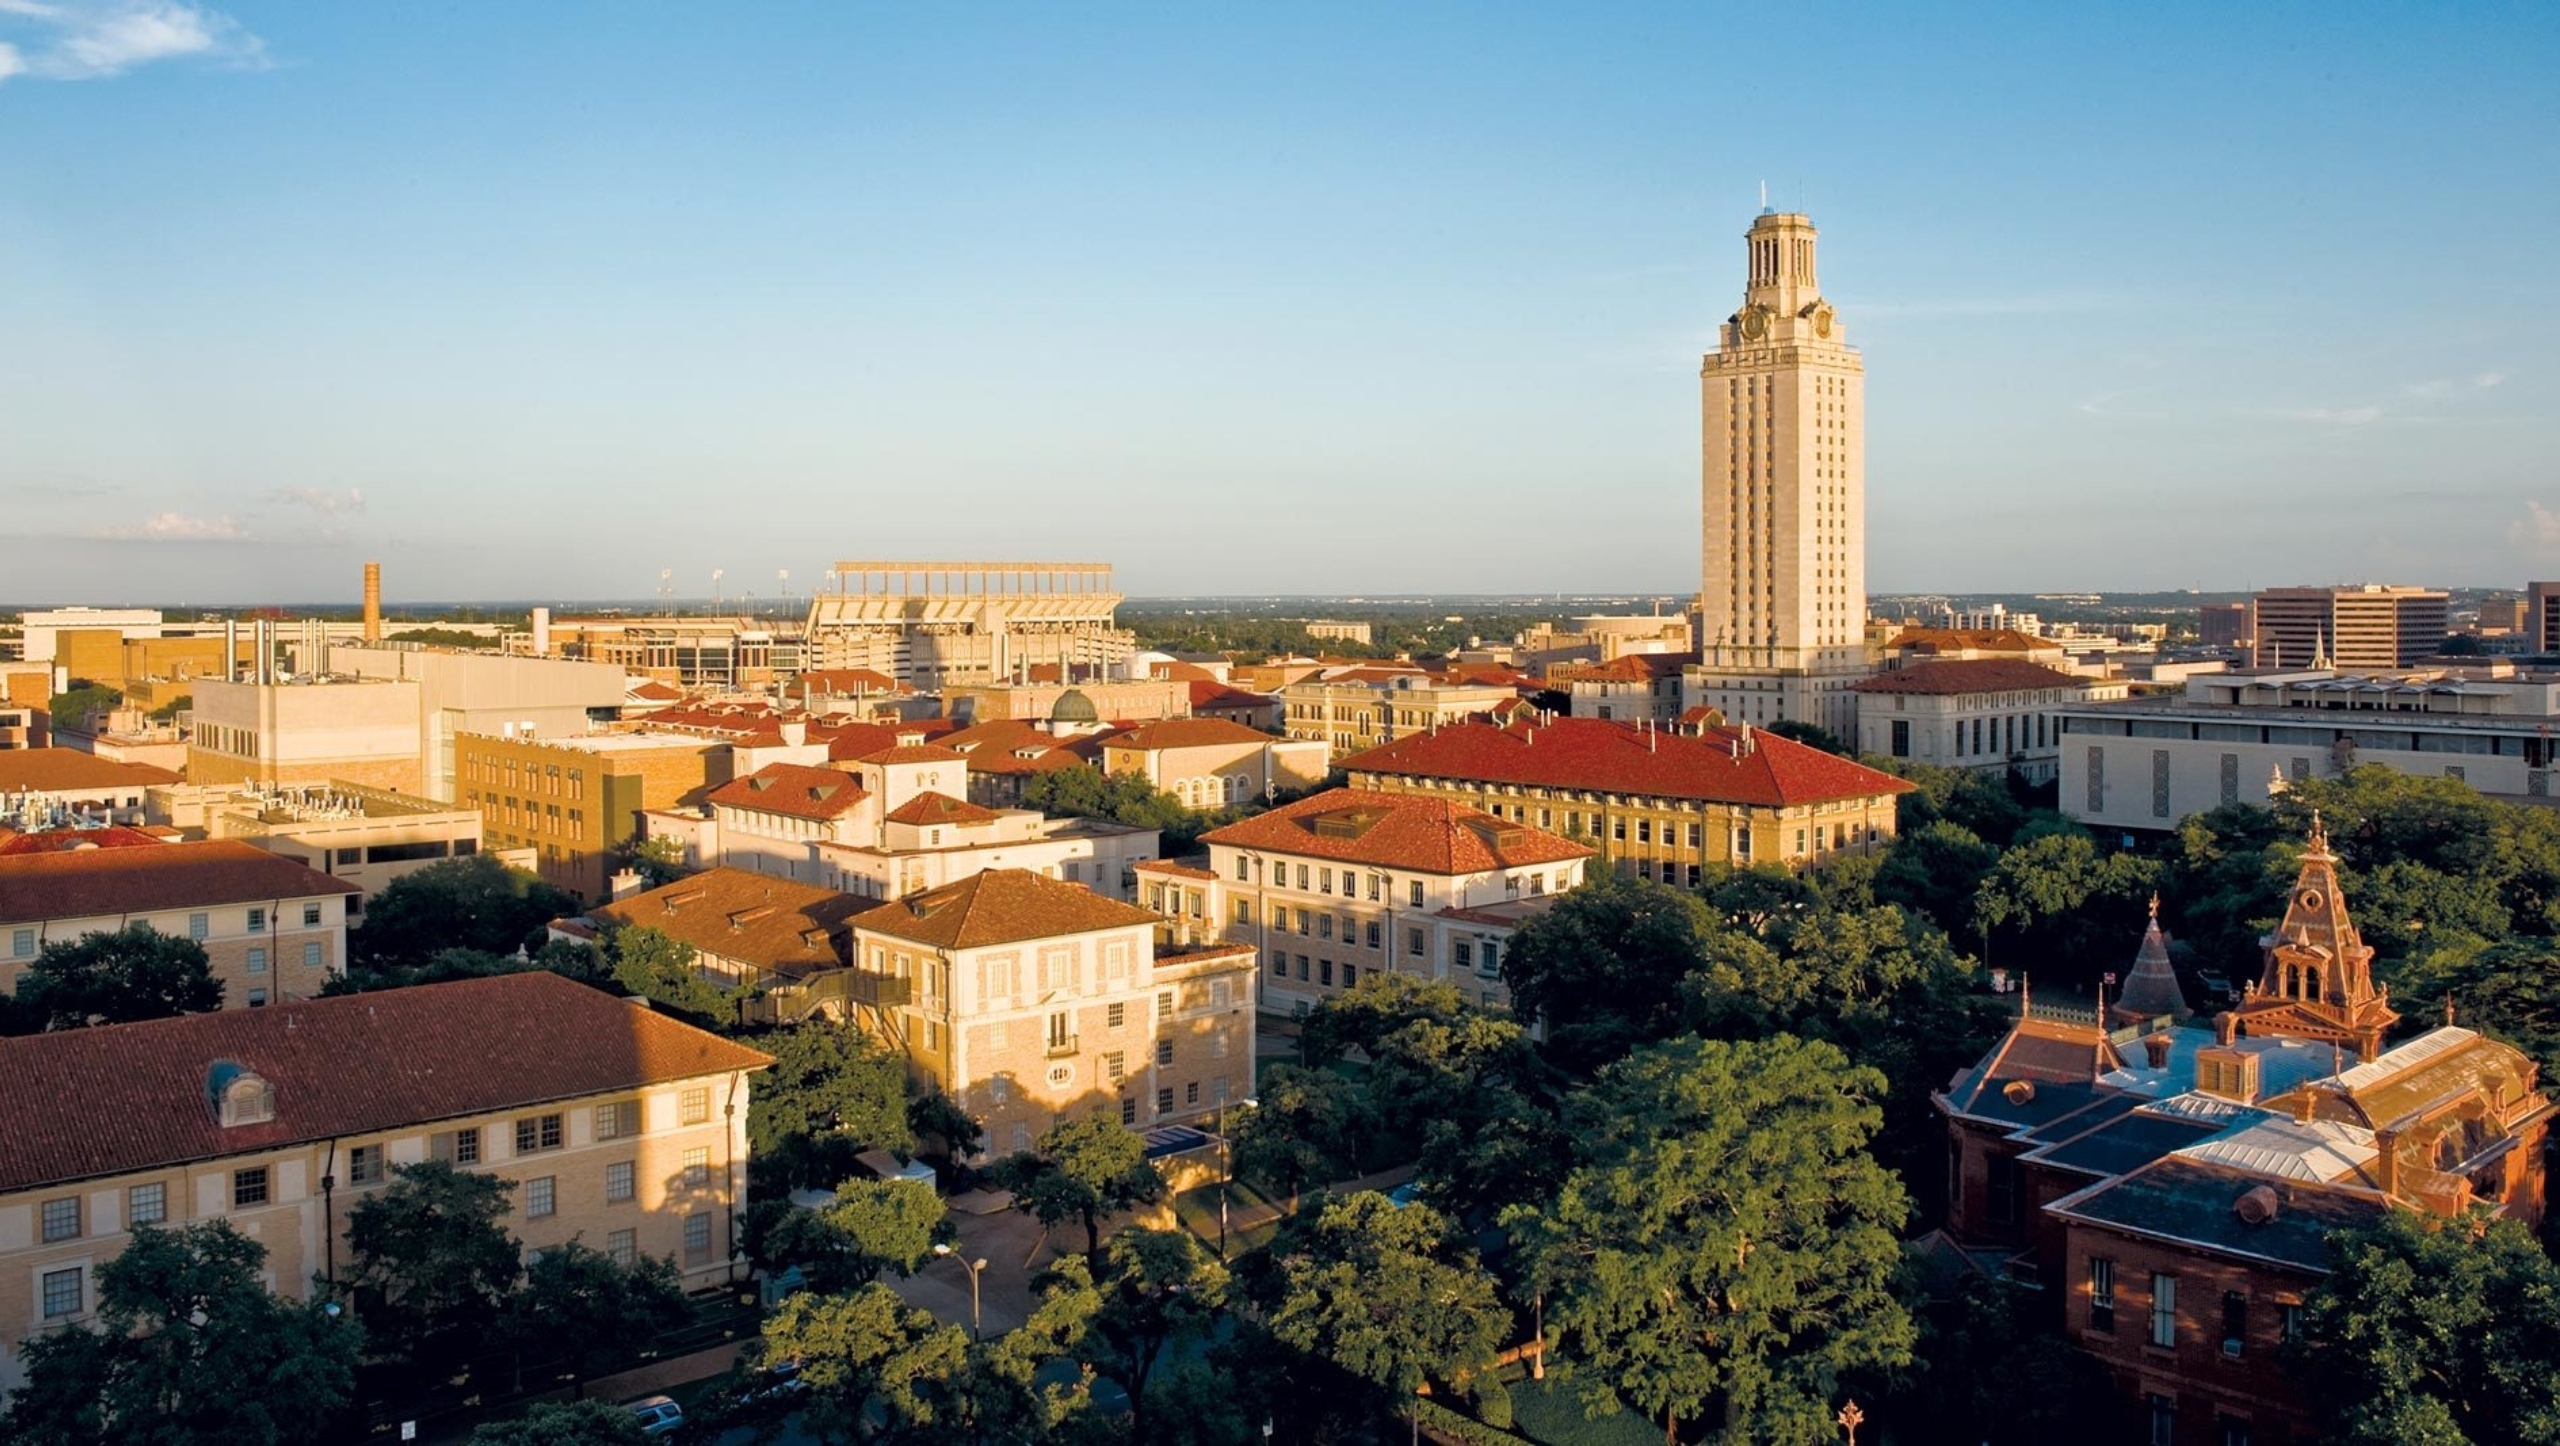 The University of Texas at Austin's campus Tower.